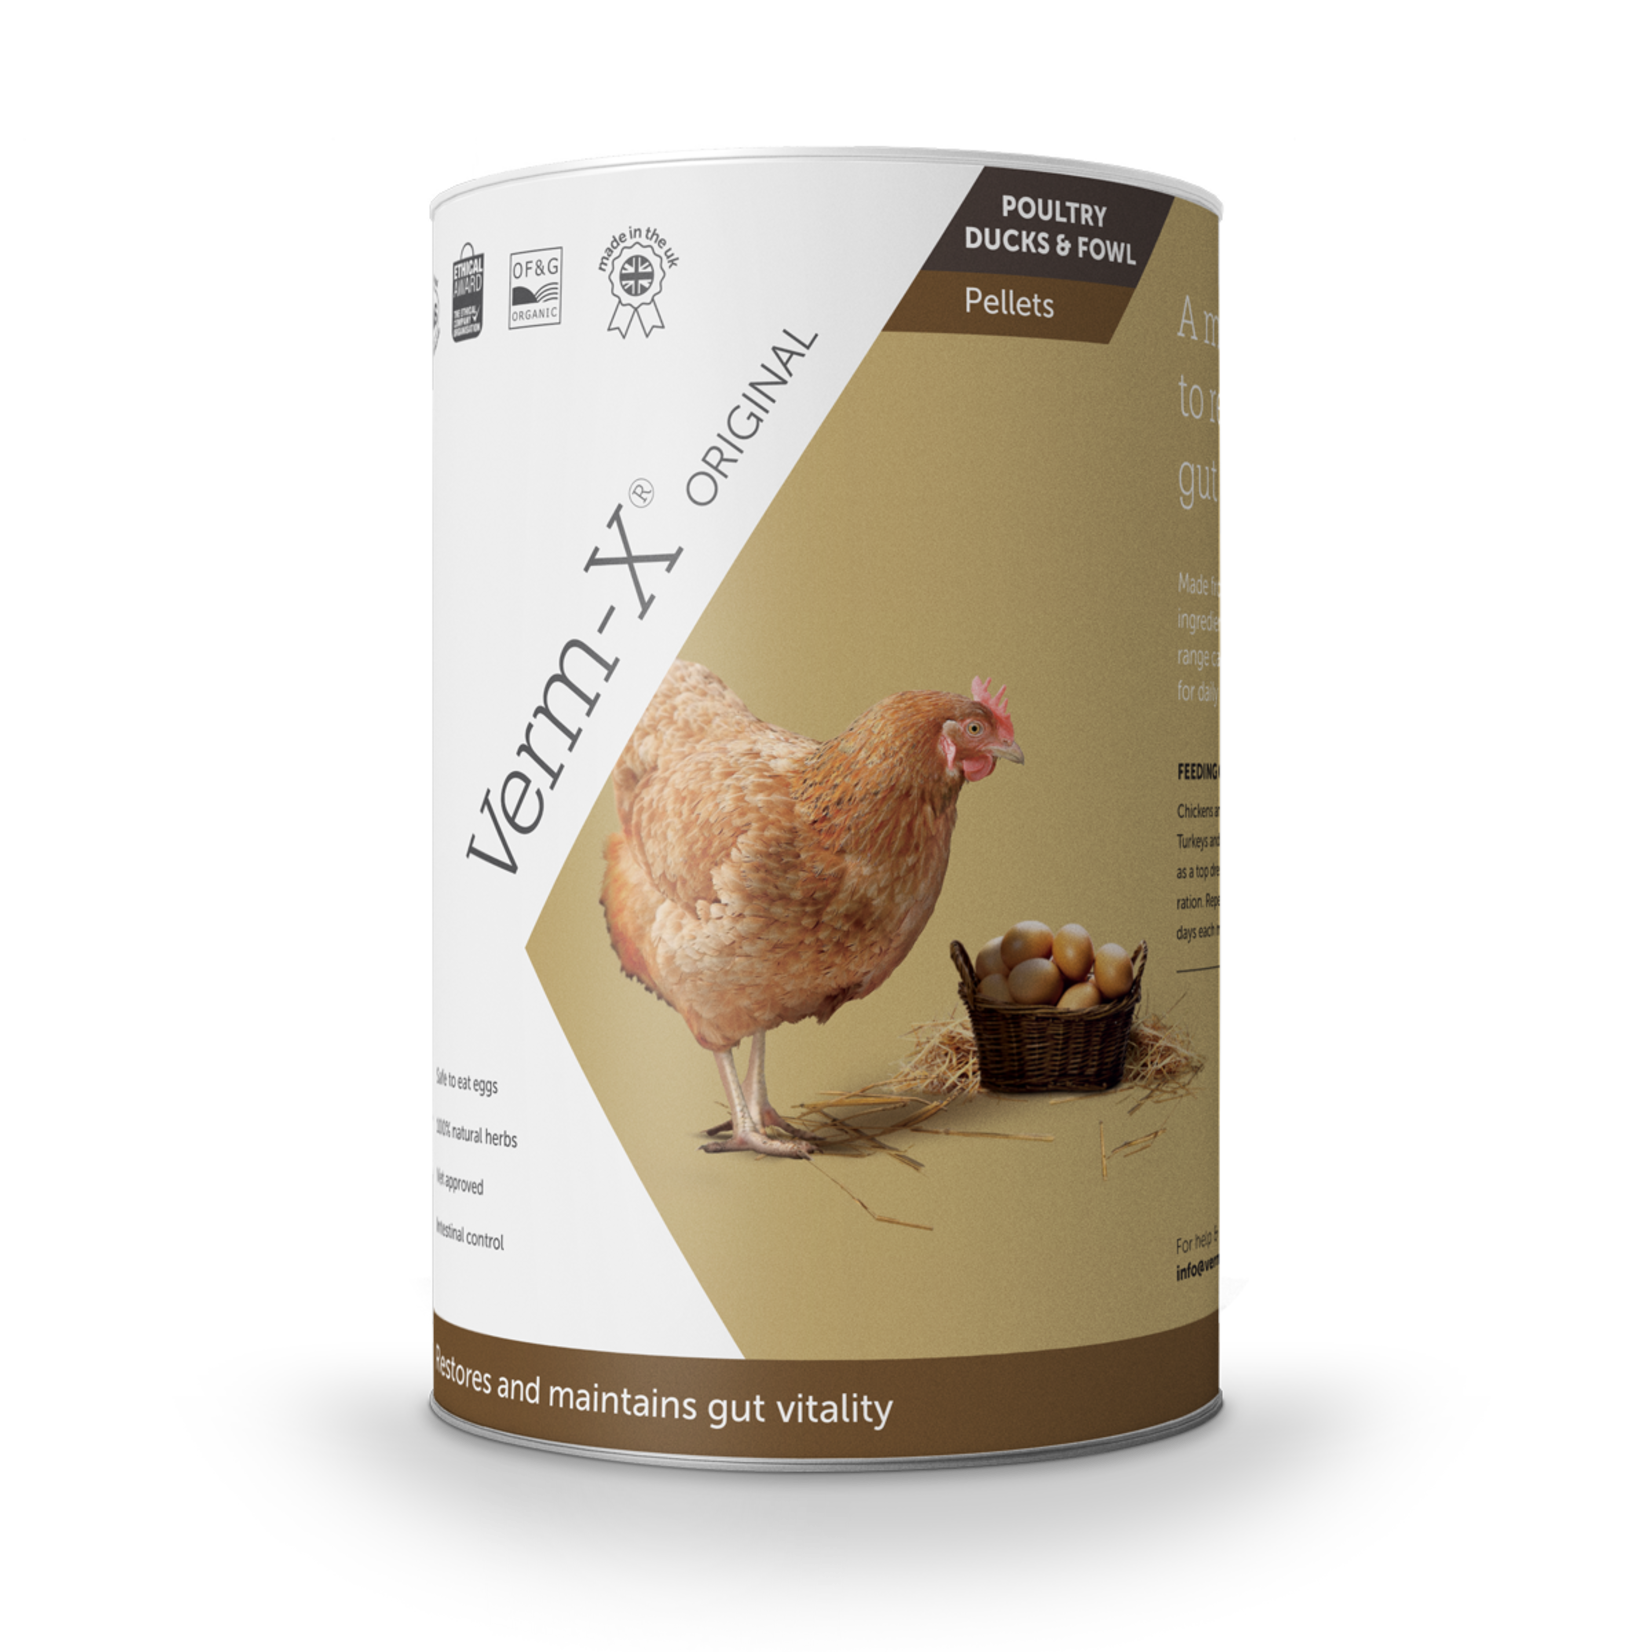 Verm X Original Pellets for Poultry, Ducks and Fowl, 250g